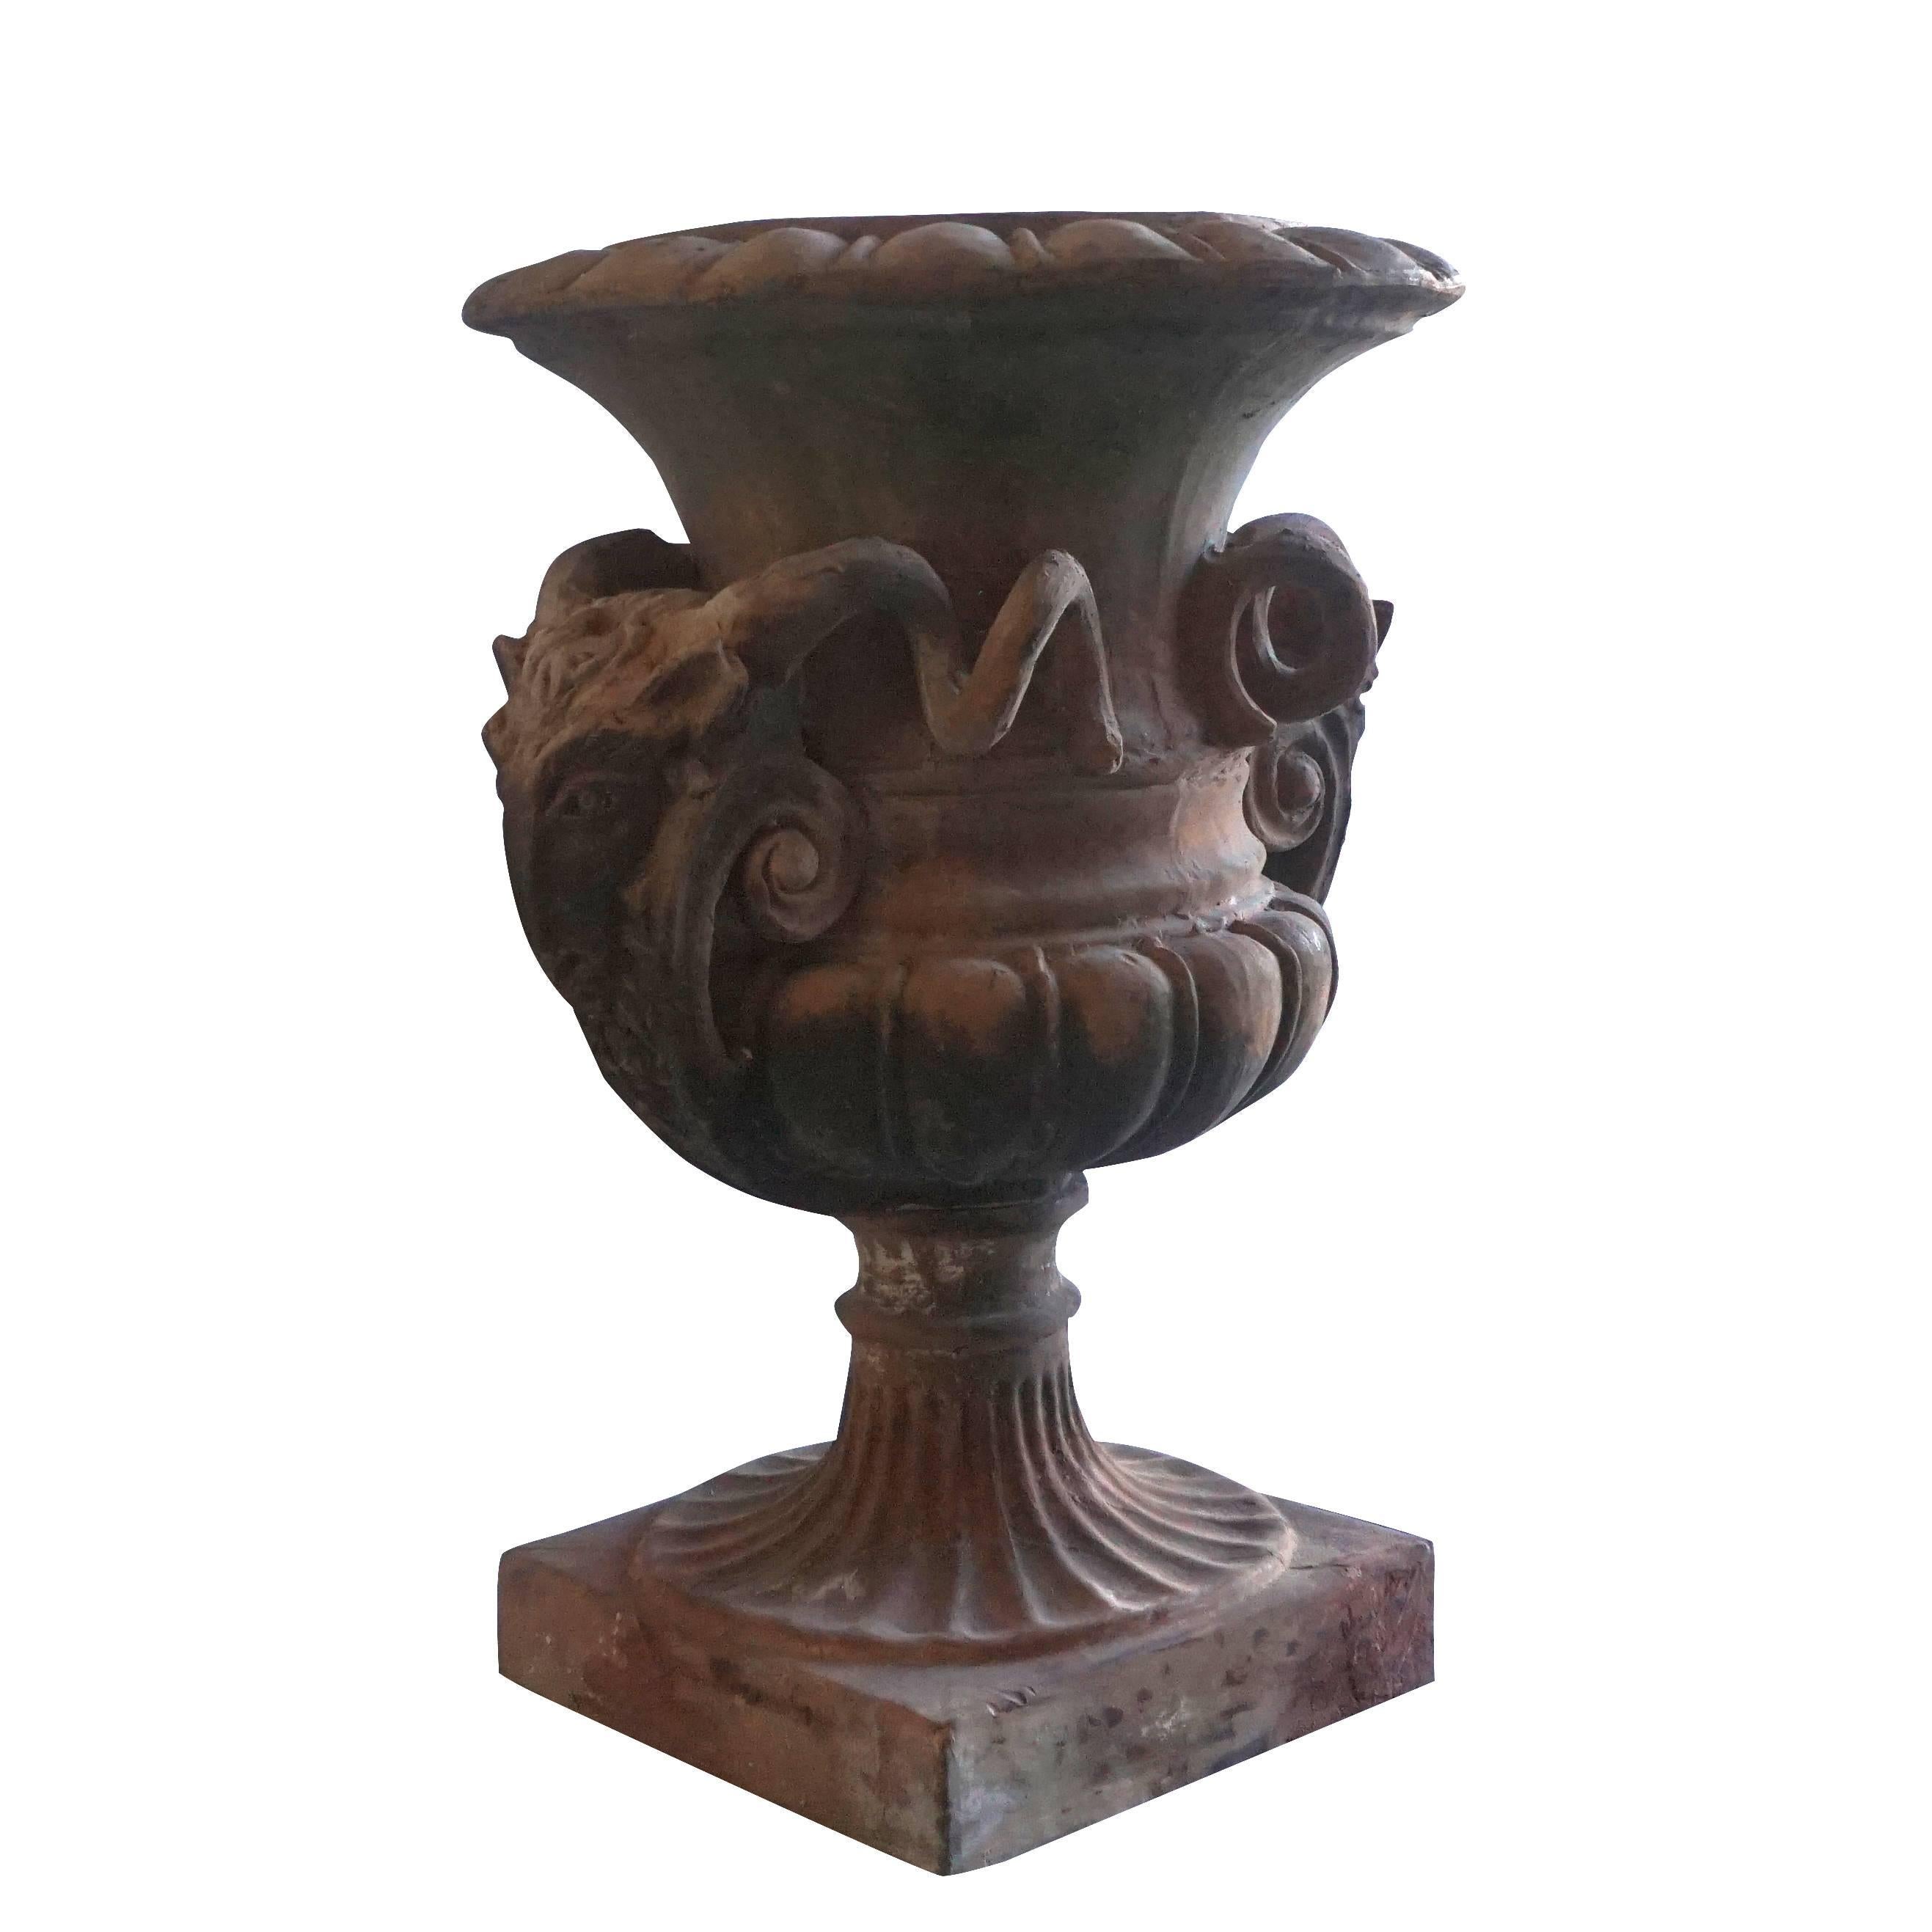 Italian Late 19th Century Pair of Tuscan Neoclassical Style Urns in Terracotta